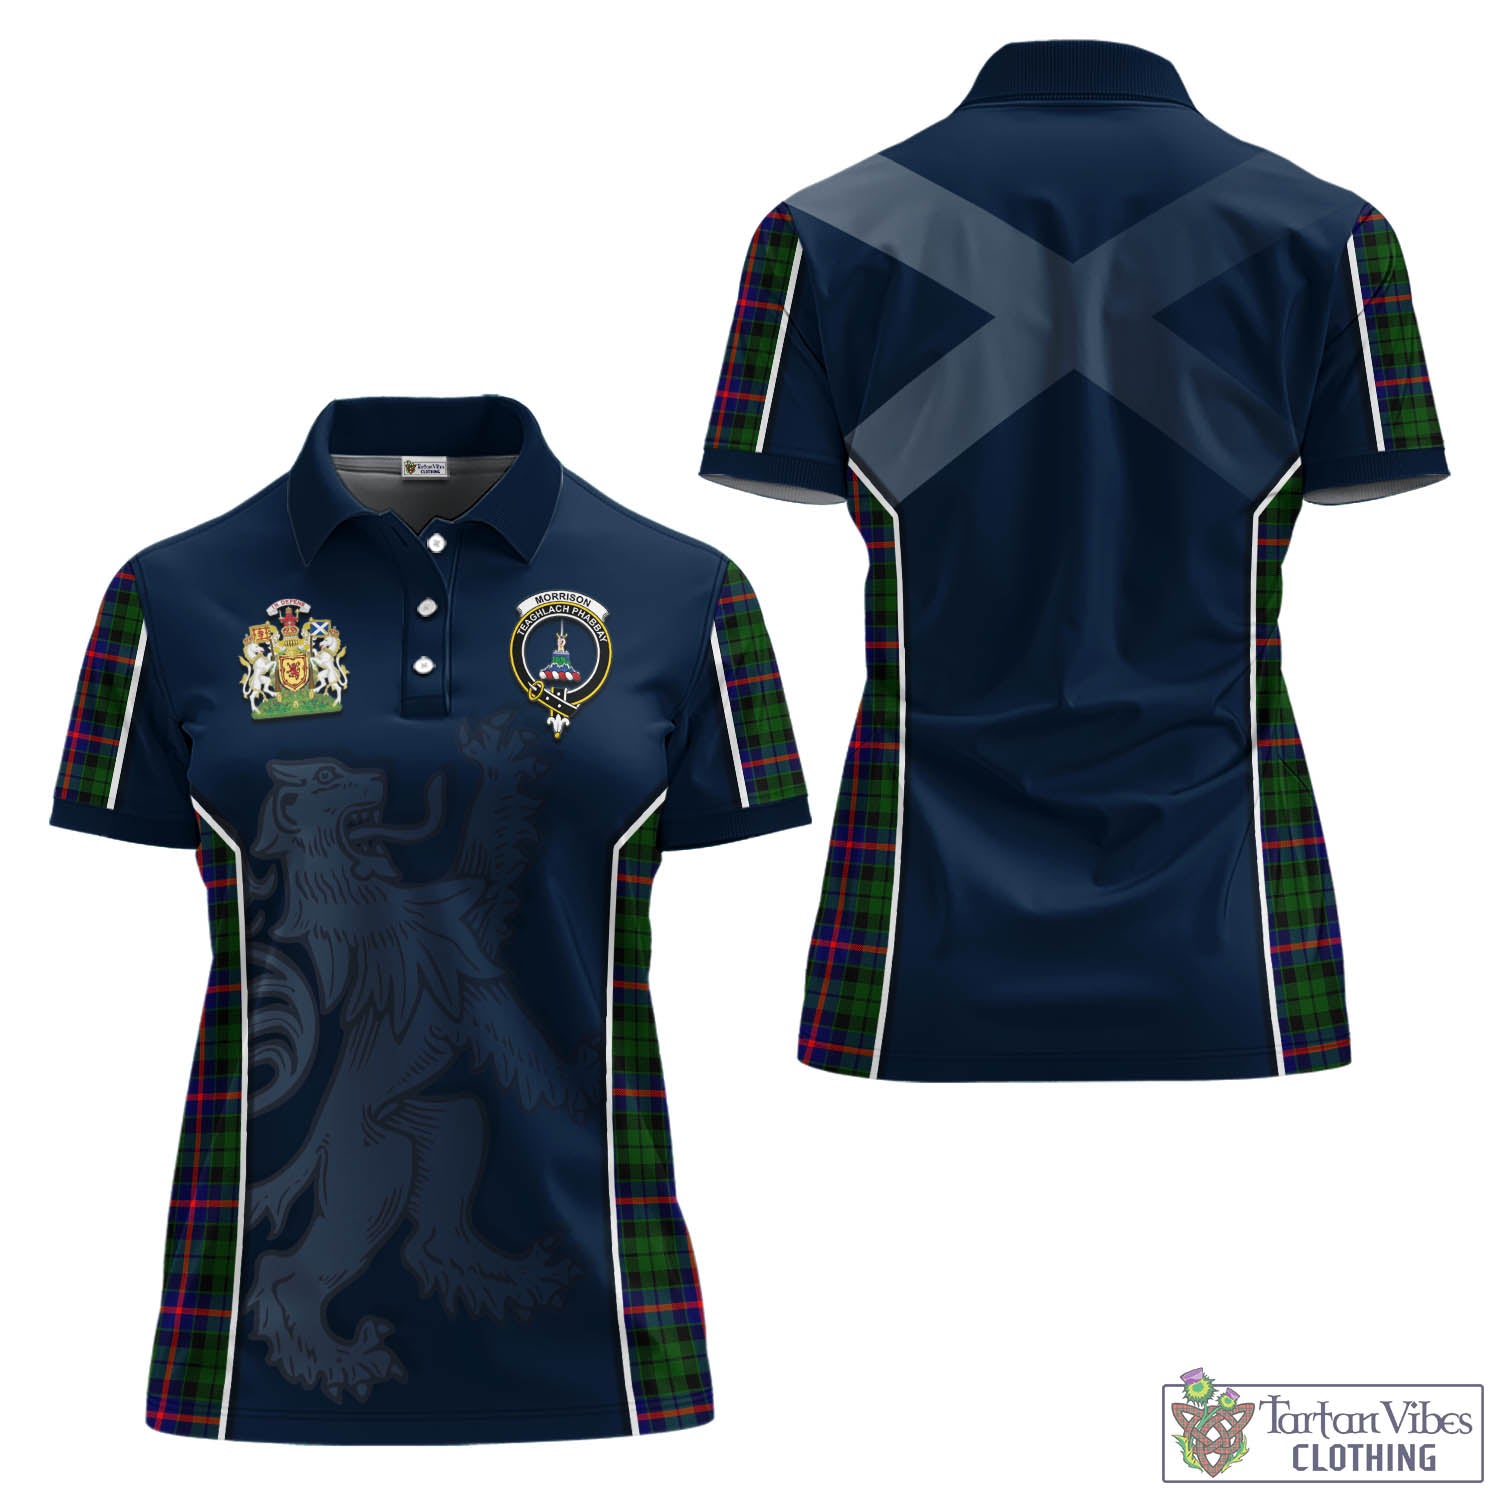 Tartan Vibes Clothing Morrison Modern Tartan Women's Polo Shirt with Family Crest and Lion Rampant Vibes Sport Style